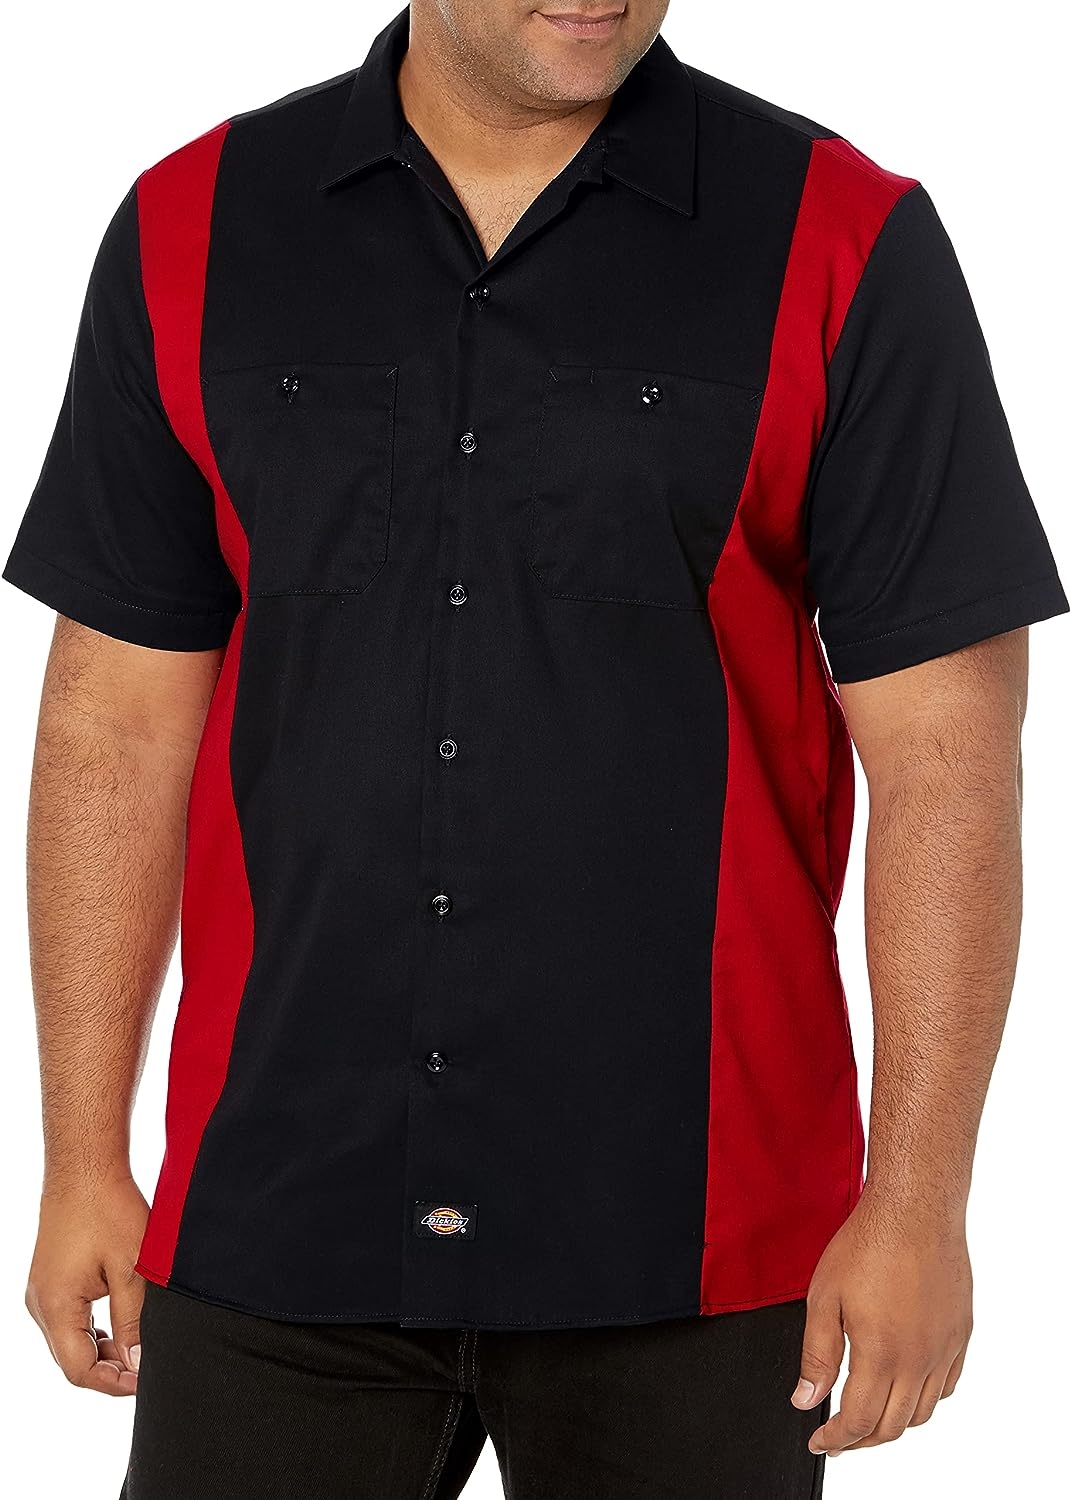 Dickies Men’s Short-Sleeve Two-Tone Work Shirt   price checker   price checker Description Gallery Reviews Variations